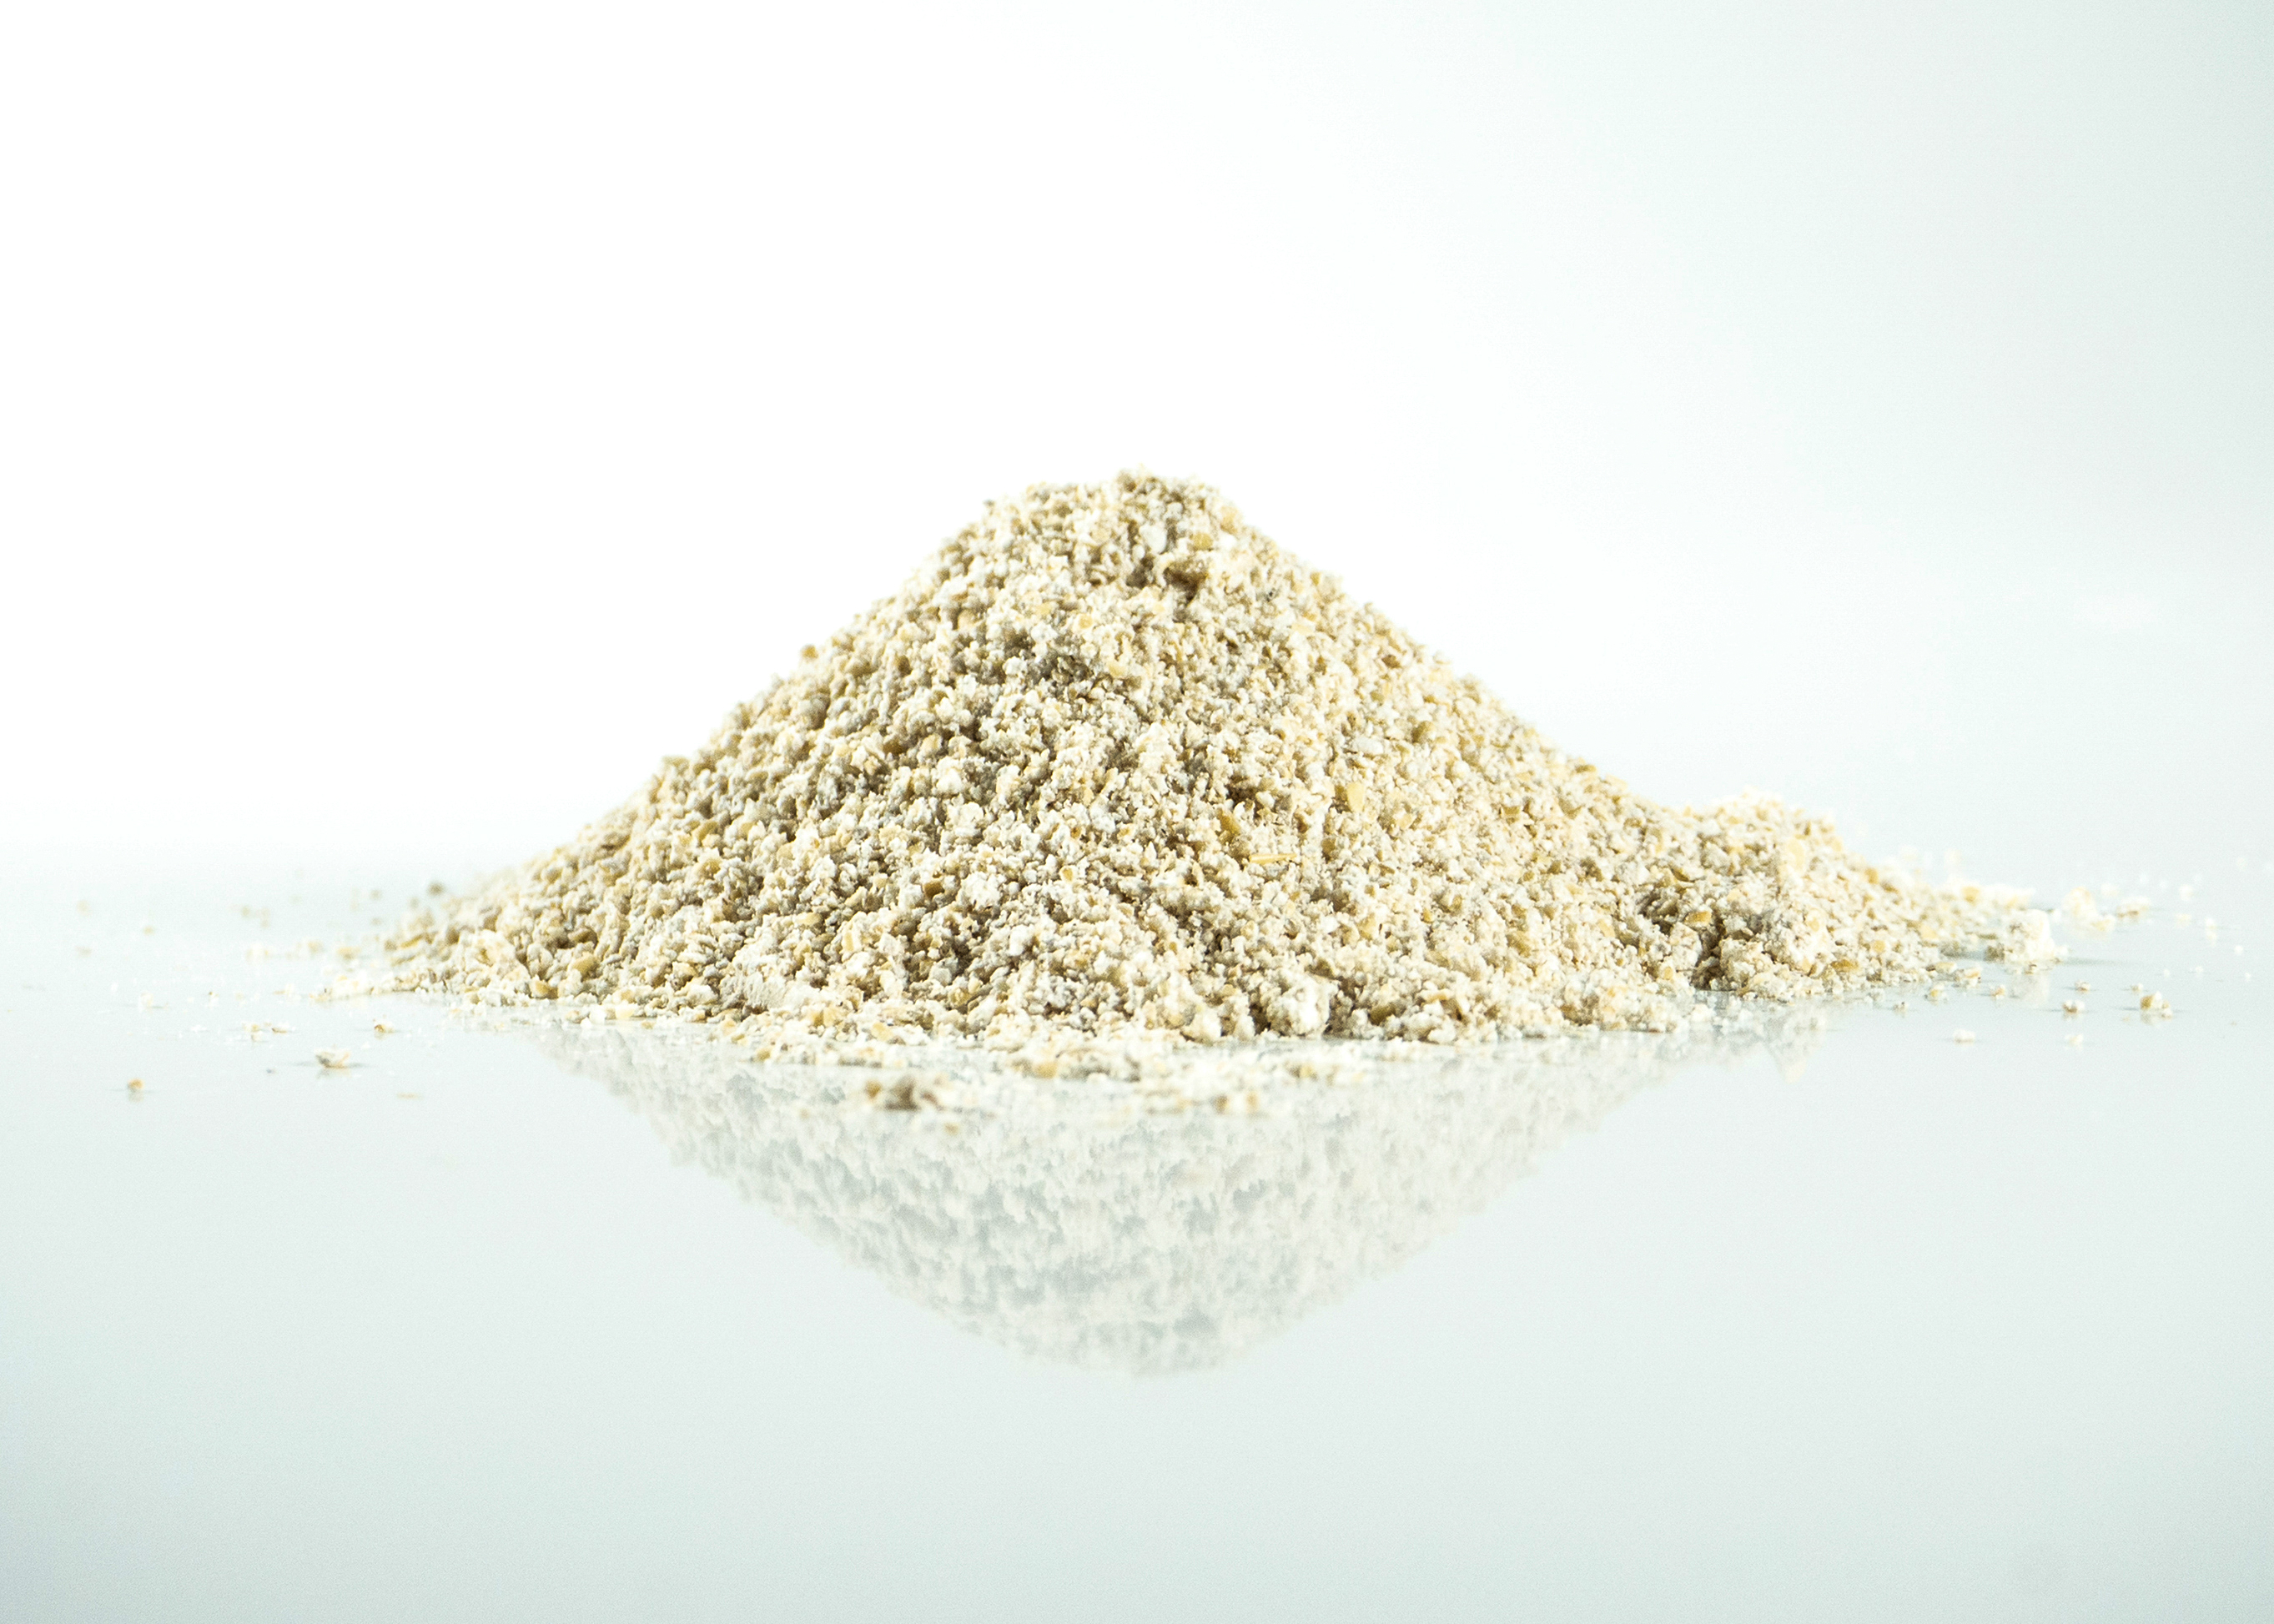 Oat bran concentrates